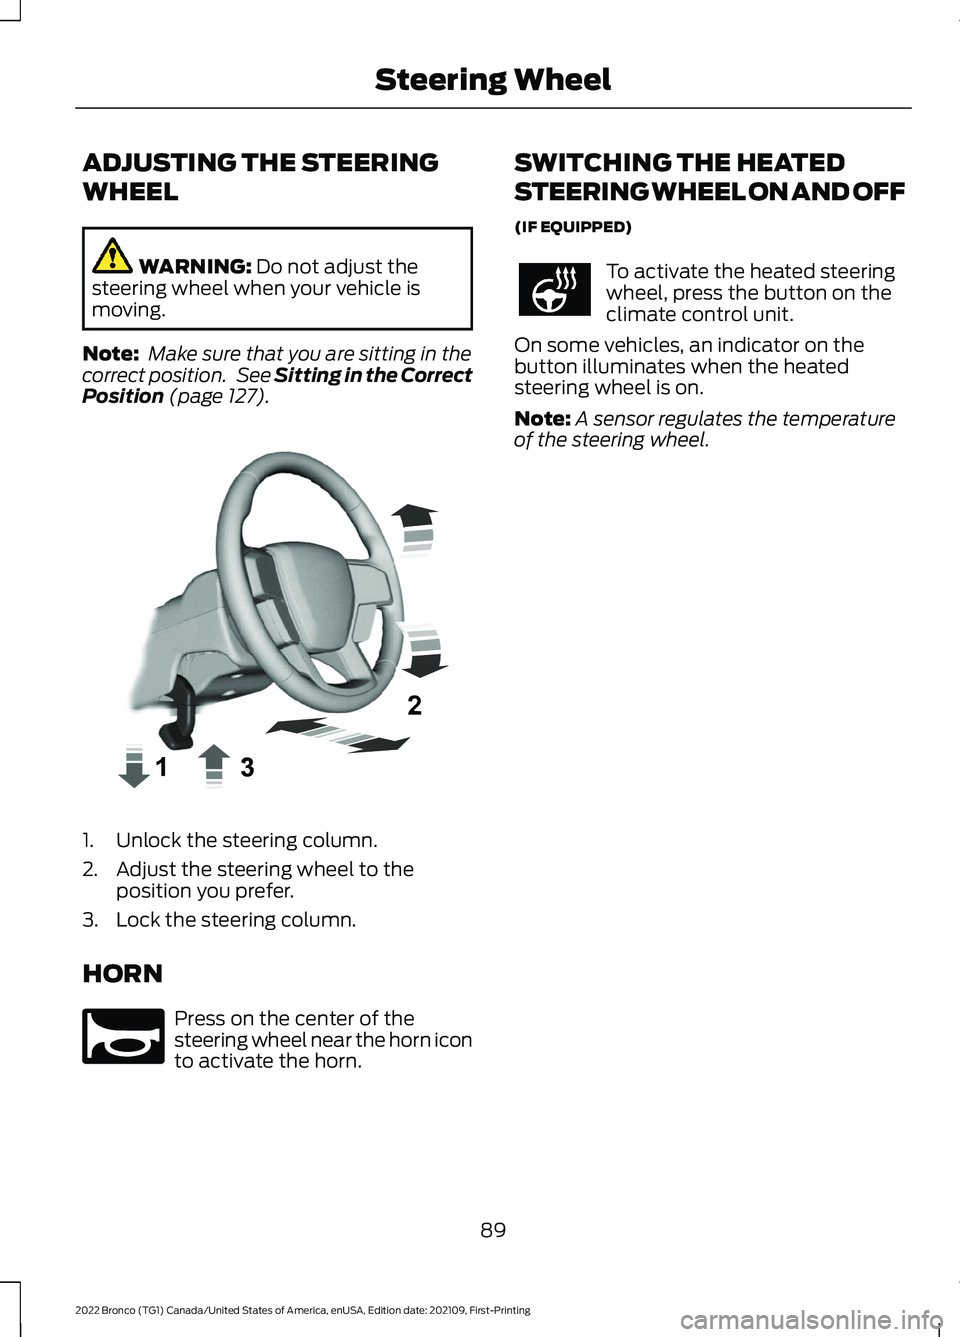 FORD BRONCO 2022  Owners Manual ADJUSTING THE STEERING
WHEEL
WARNING: Do not adjust thesteering wheel when your vehicle ismoving.
Note: Make sure that you are sitting in thecorrect position. See Sitting in the CorrectPosition (page 